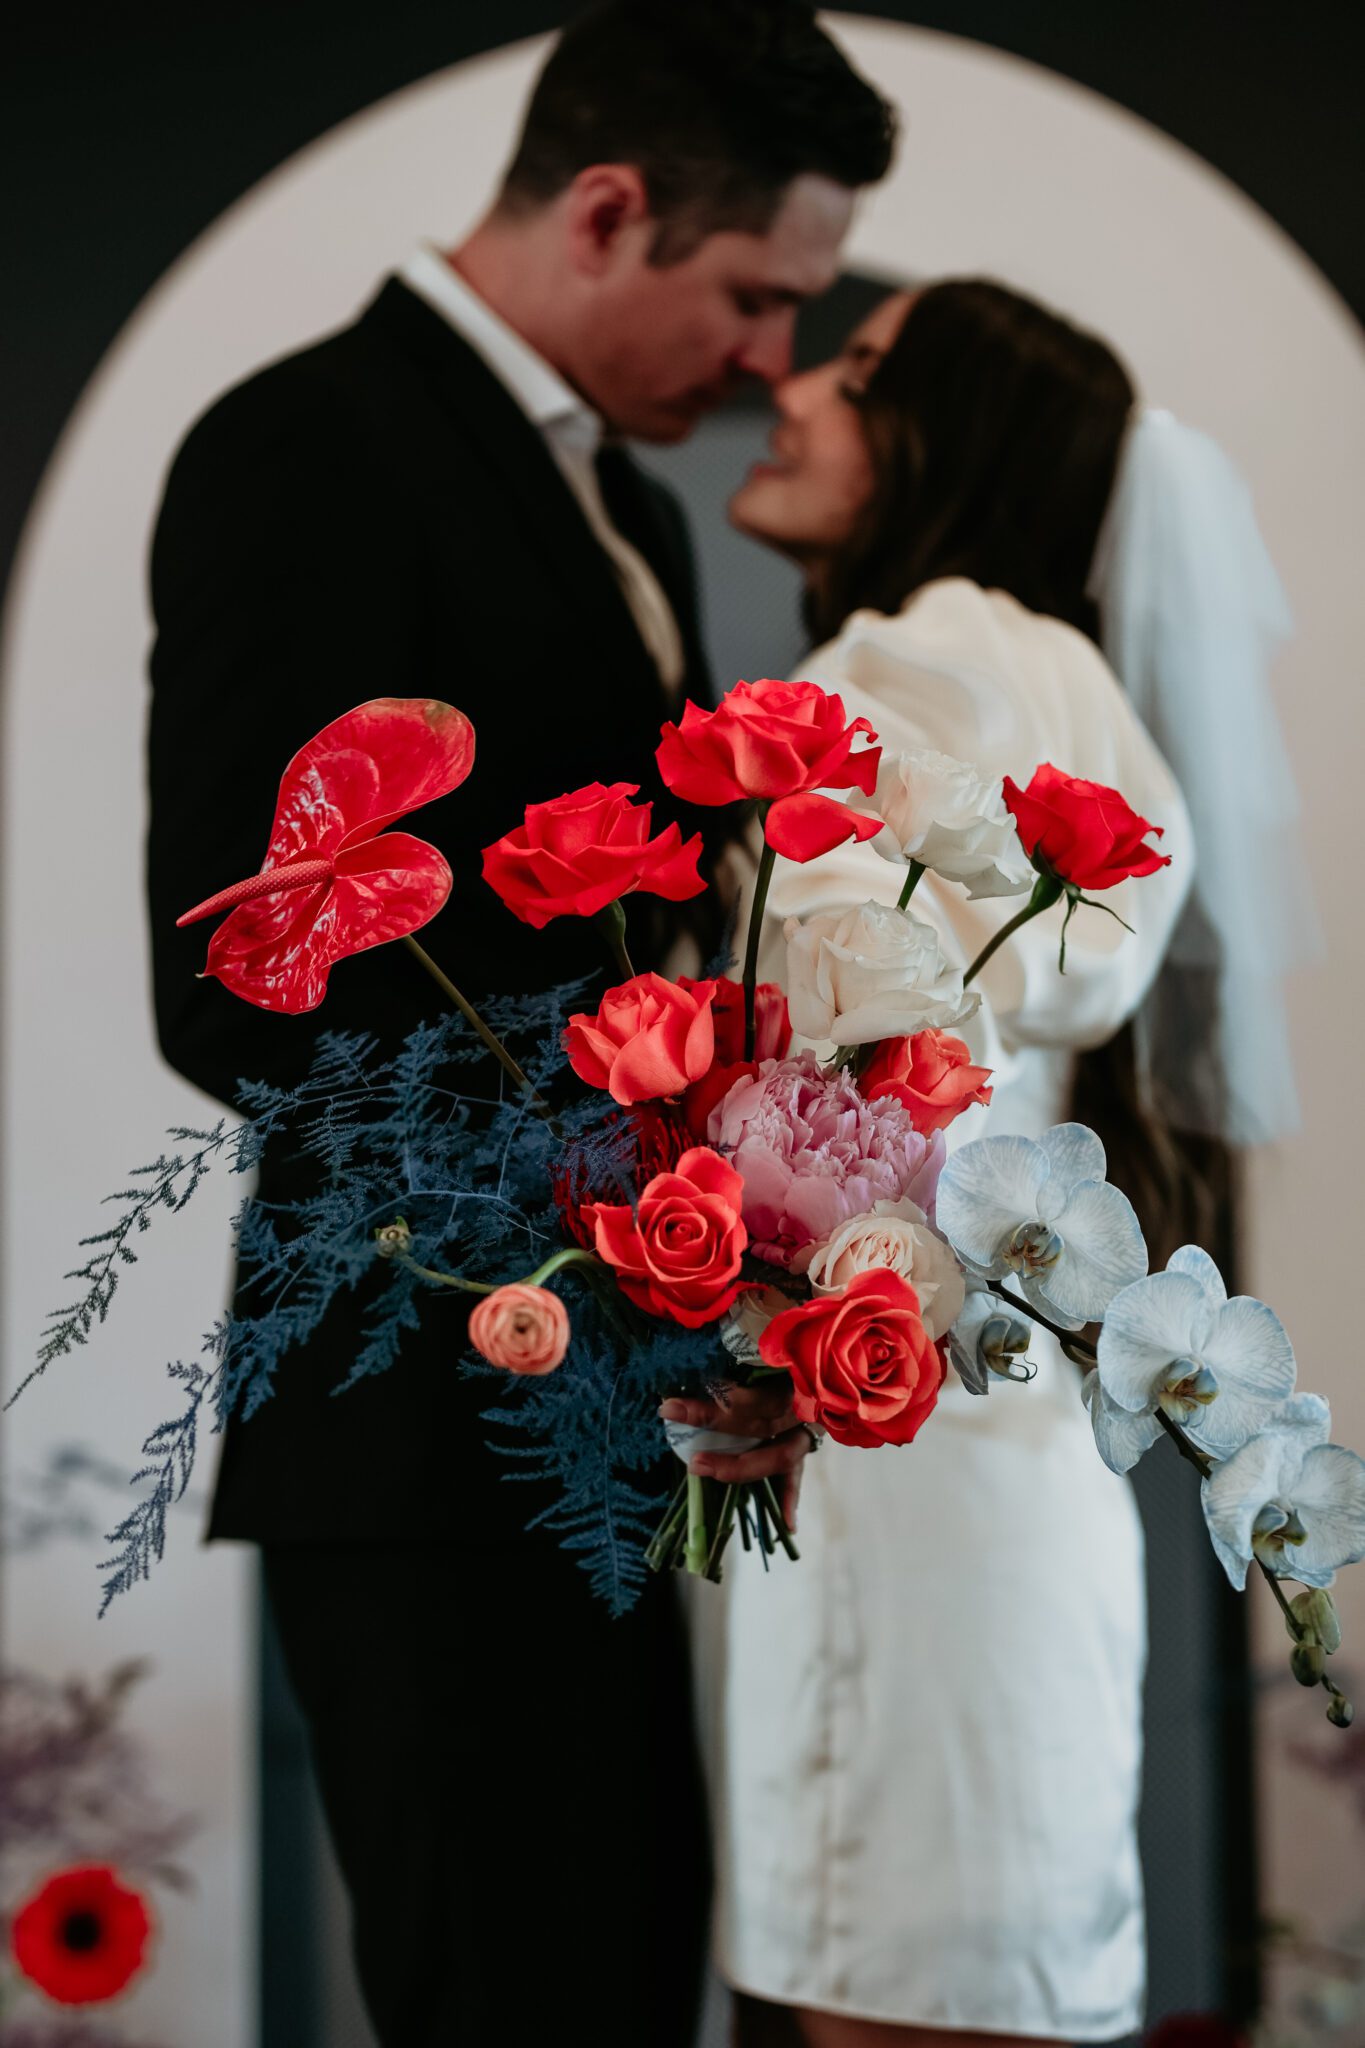 Couple kisses during bold retro-inspired wedding, combining vibrant colors, sleek lines, and nostalgic elements for a unique celebration.